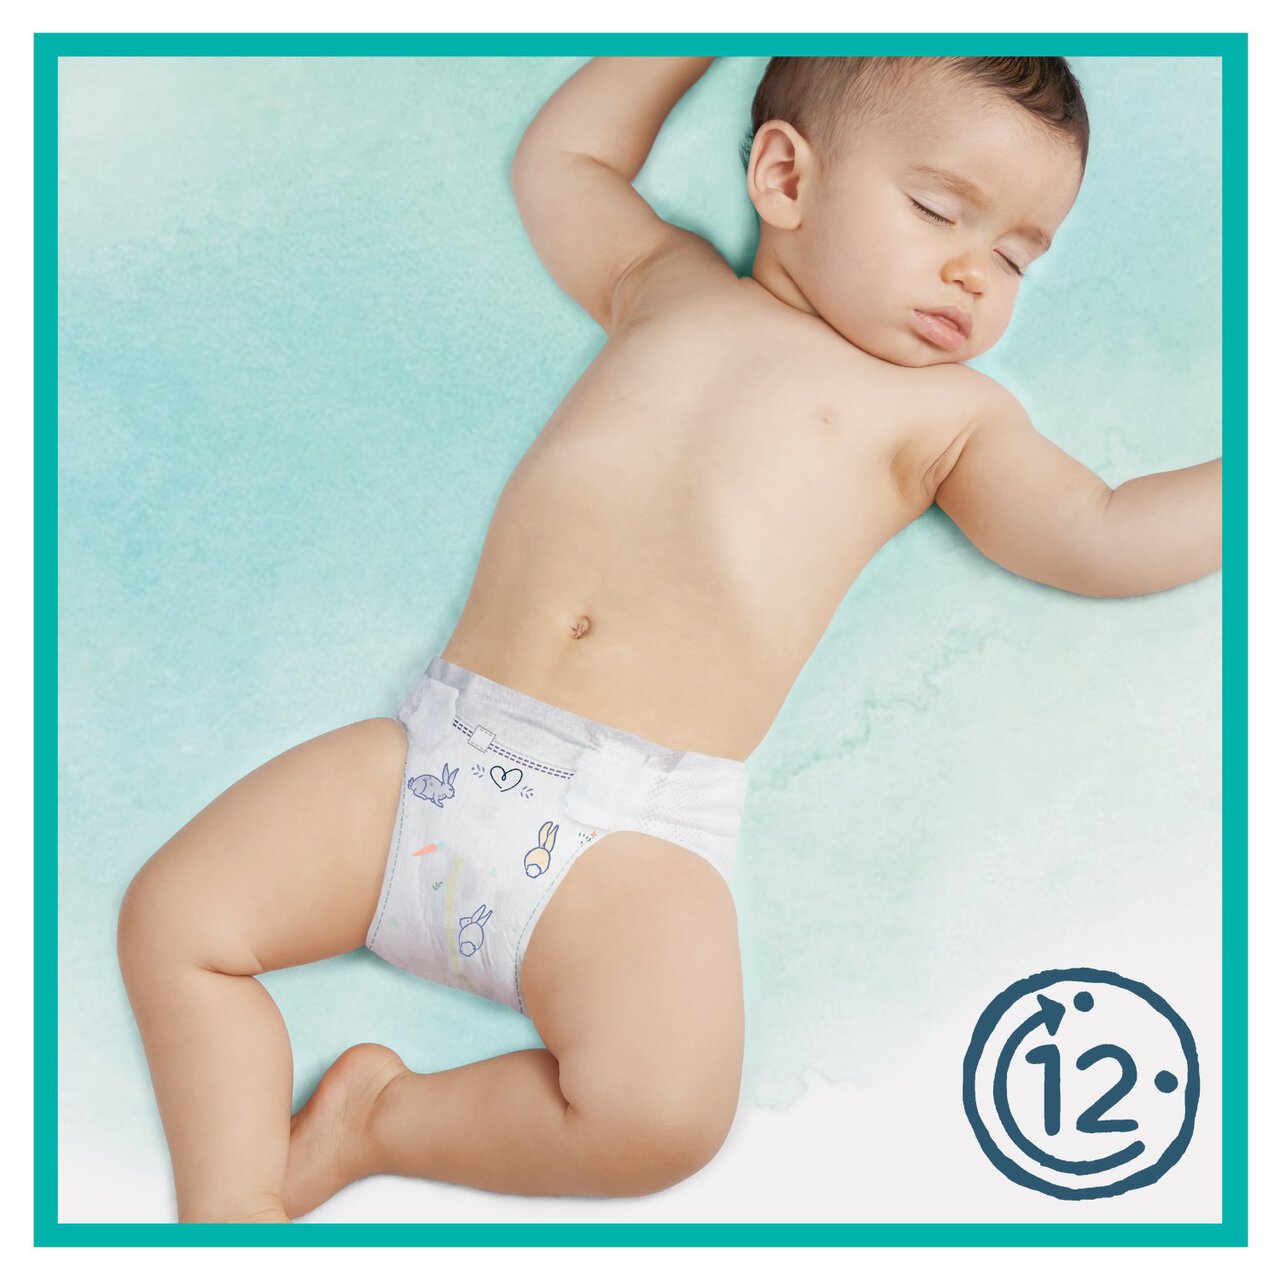 Pampers® Harmonie Couches Taille 5, +11 kg 24 pc(s) - Redcare Pharmacie